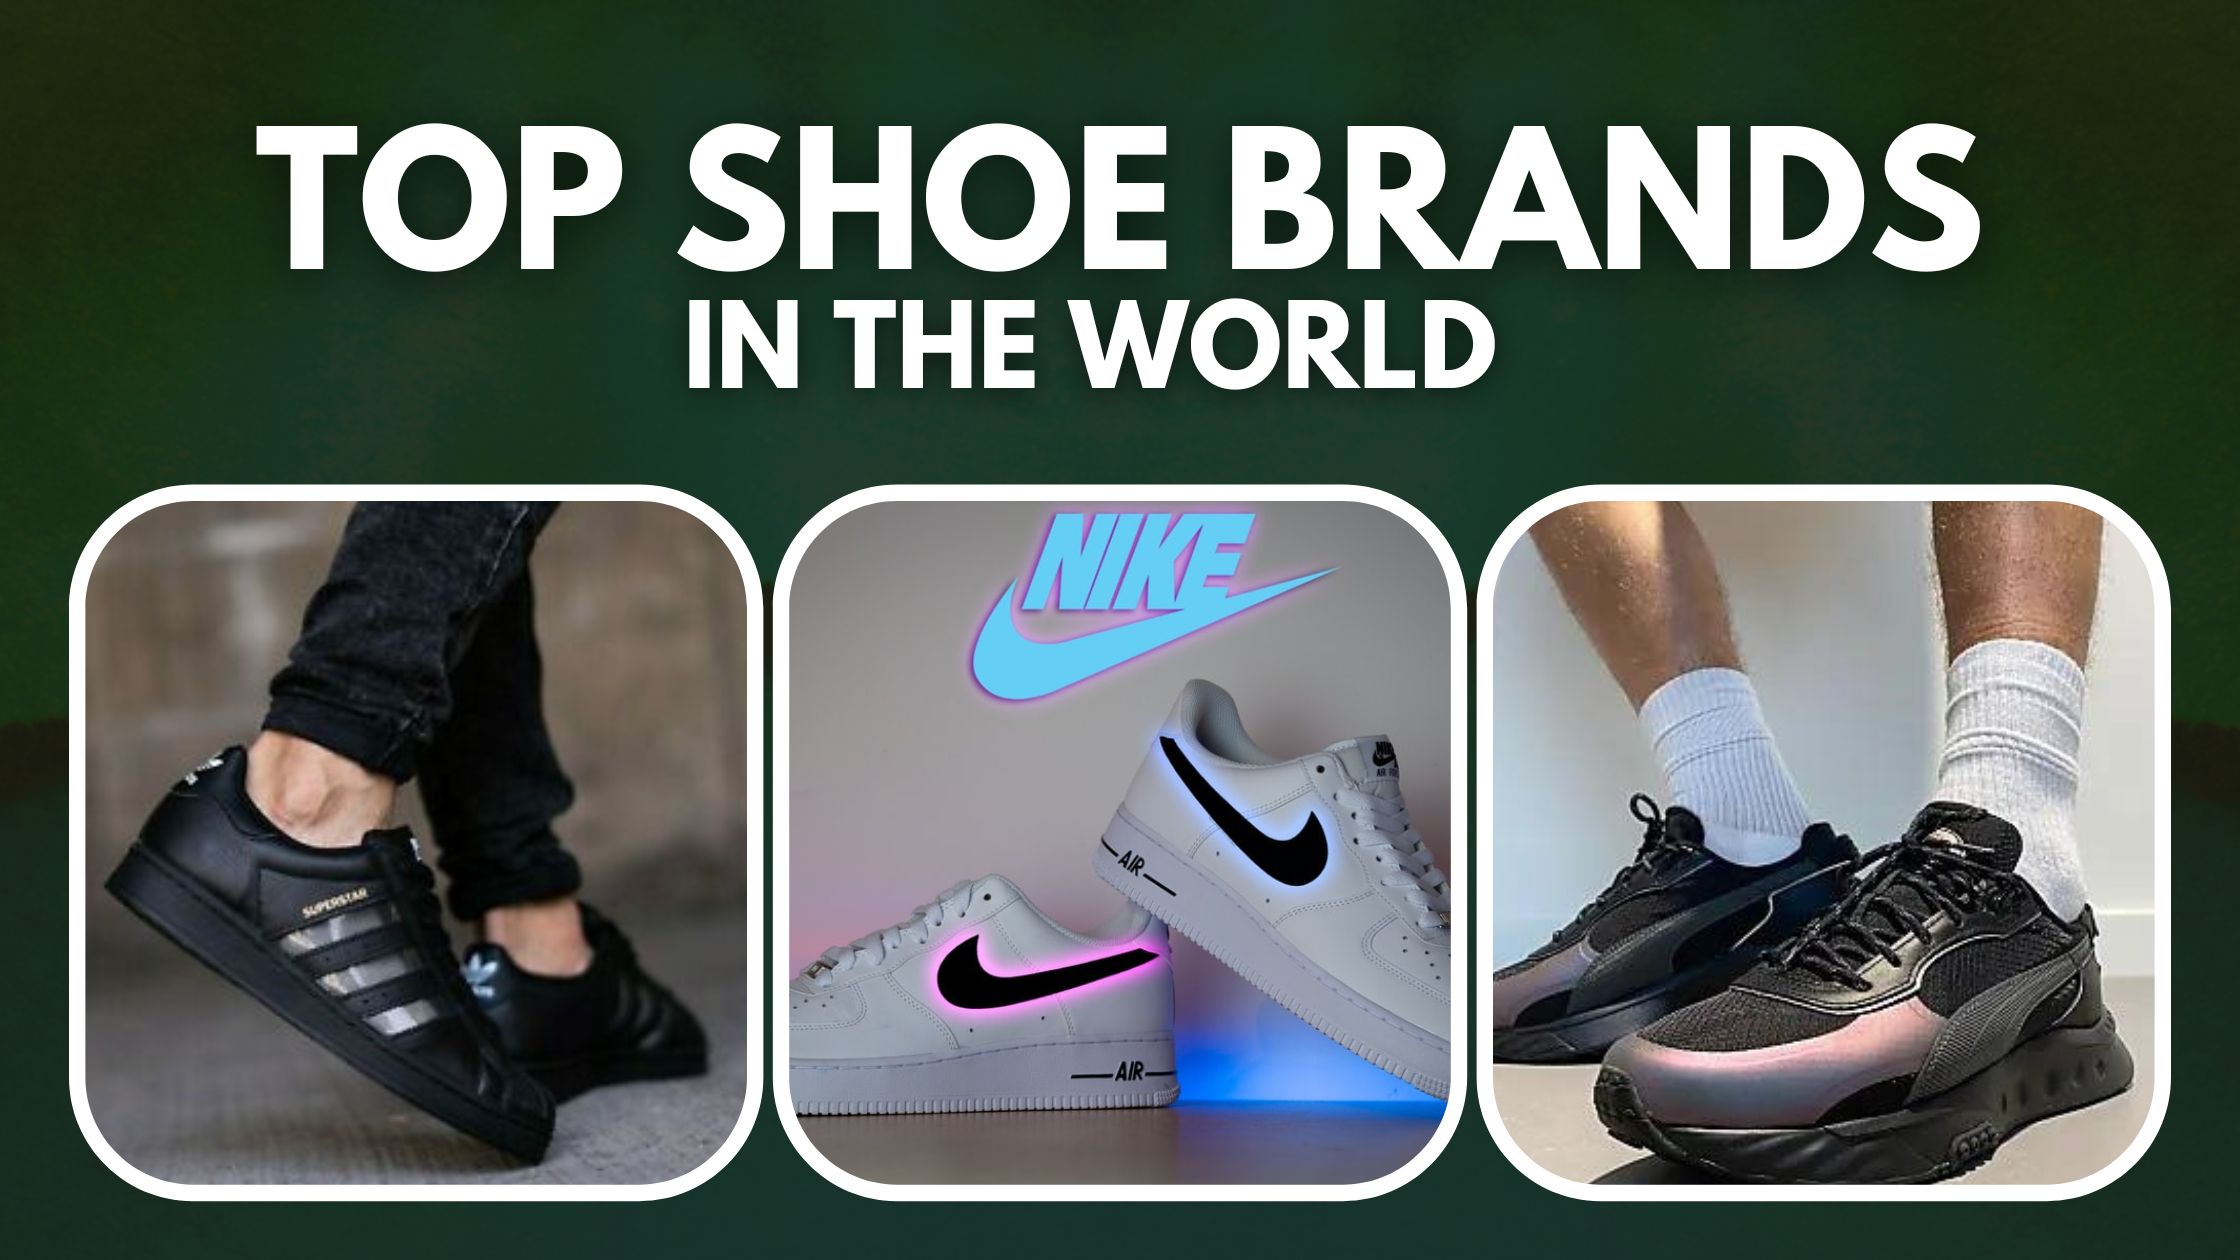 Top 10 Shoe Brands in the World (2022)